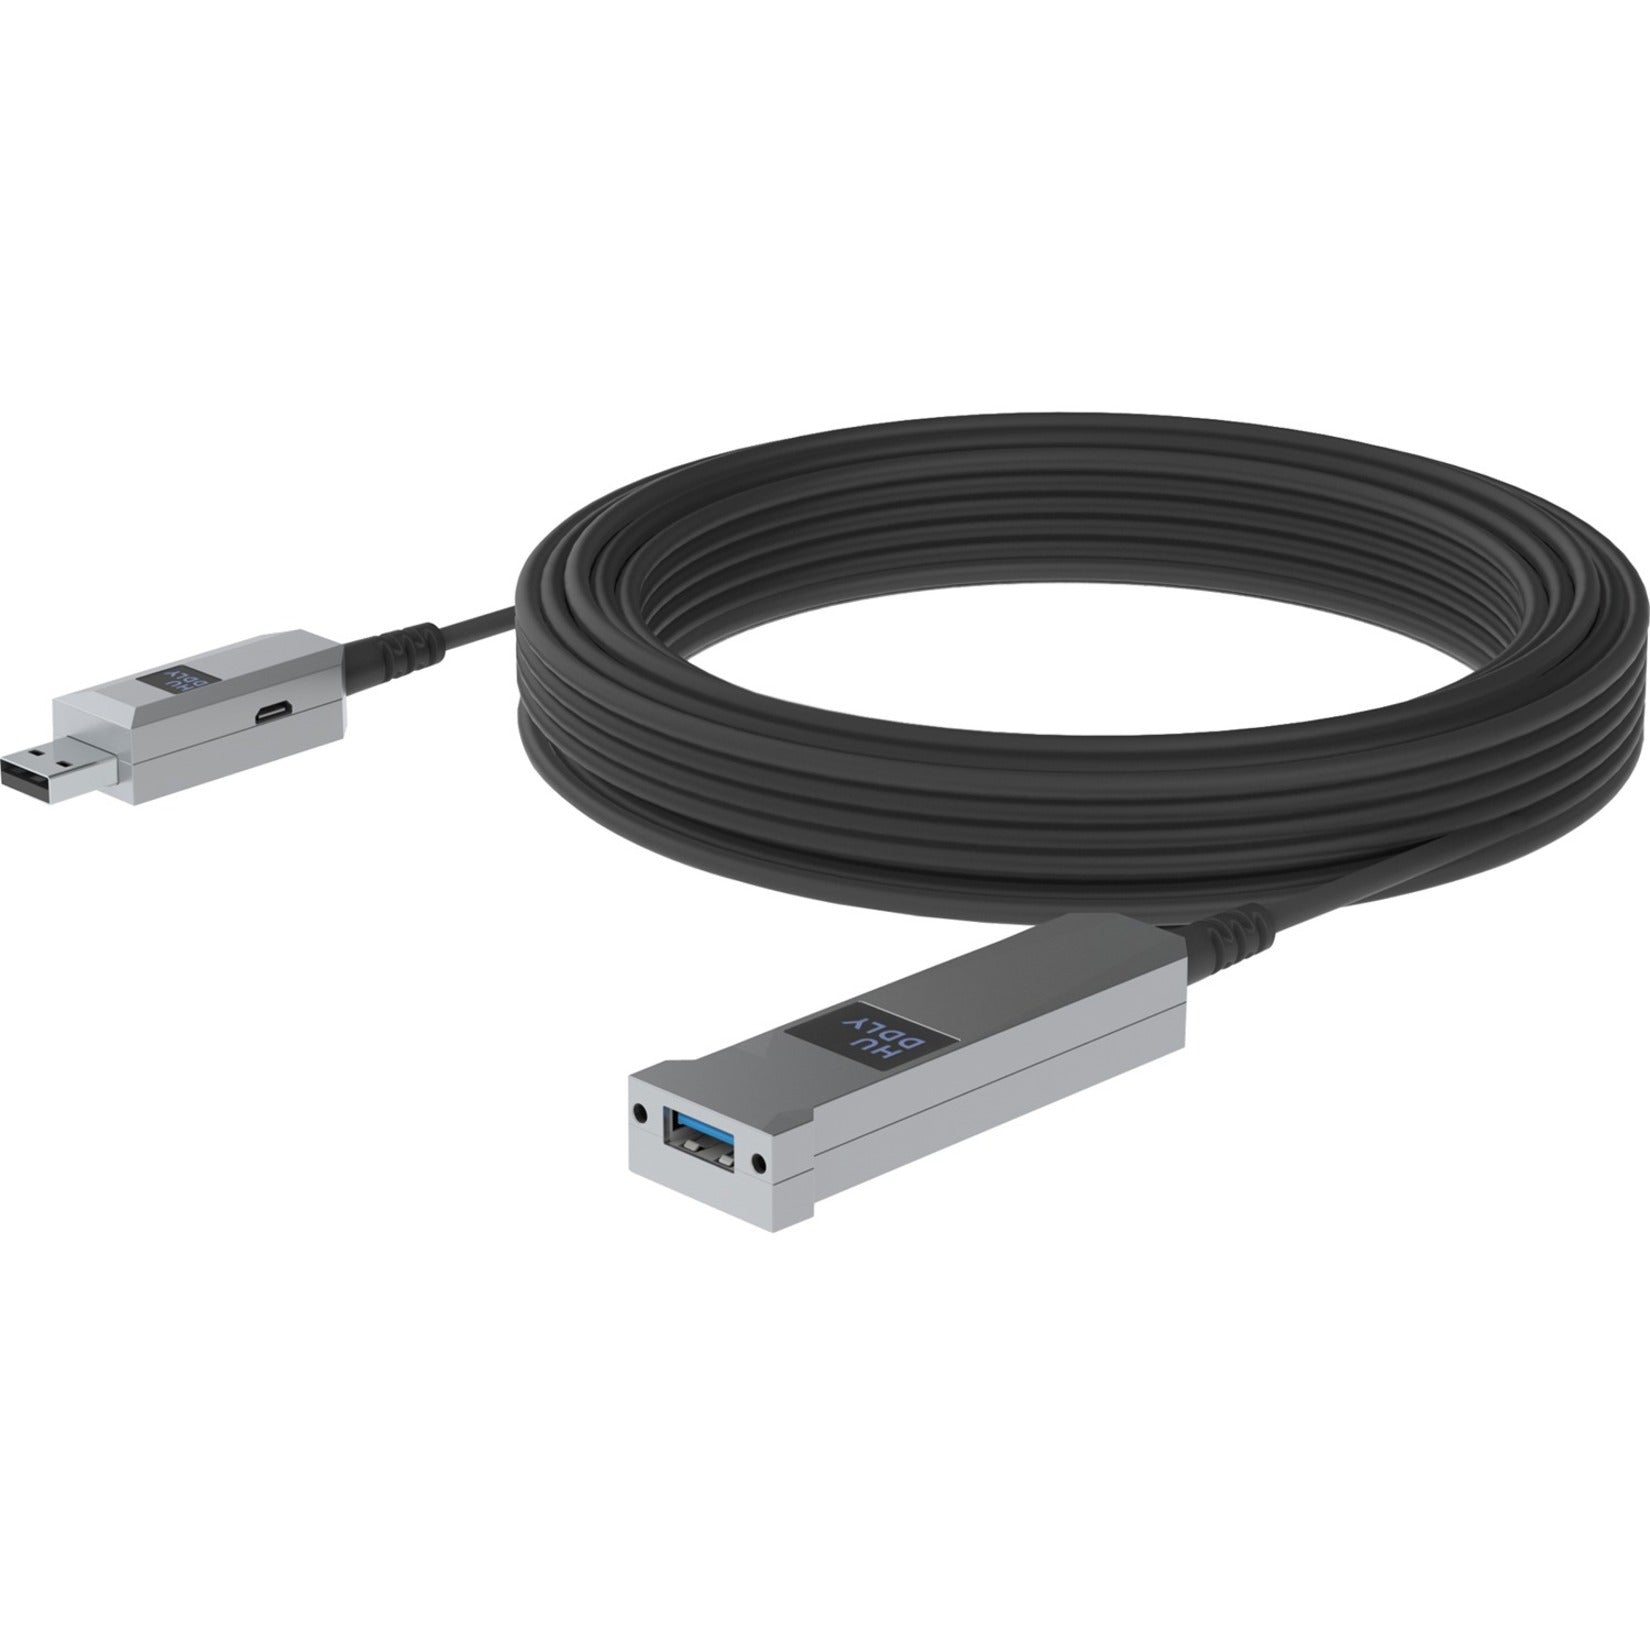 Huddly 7090043790436 USB 3.0 Extension Cable, Active Fiber Optic, 49.21 ft